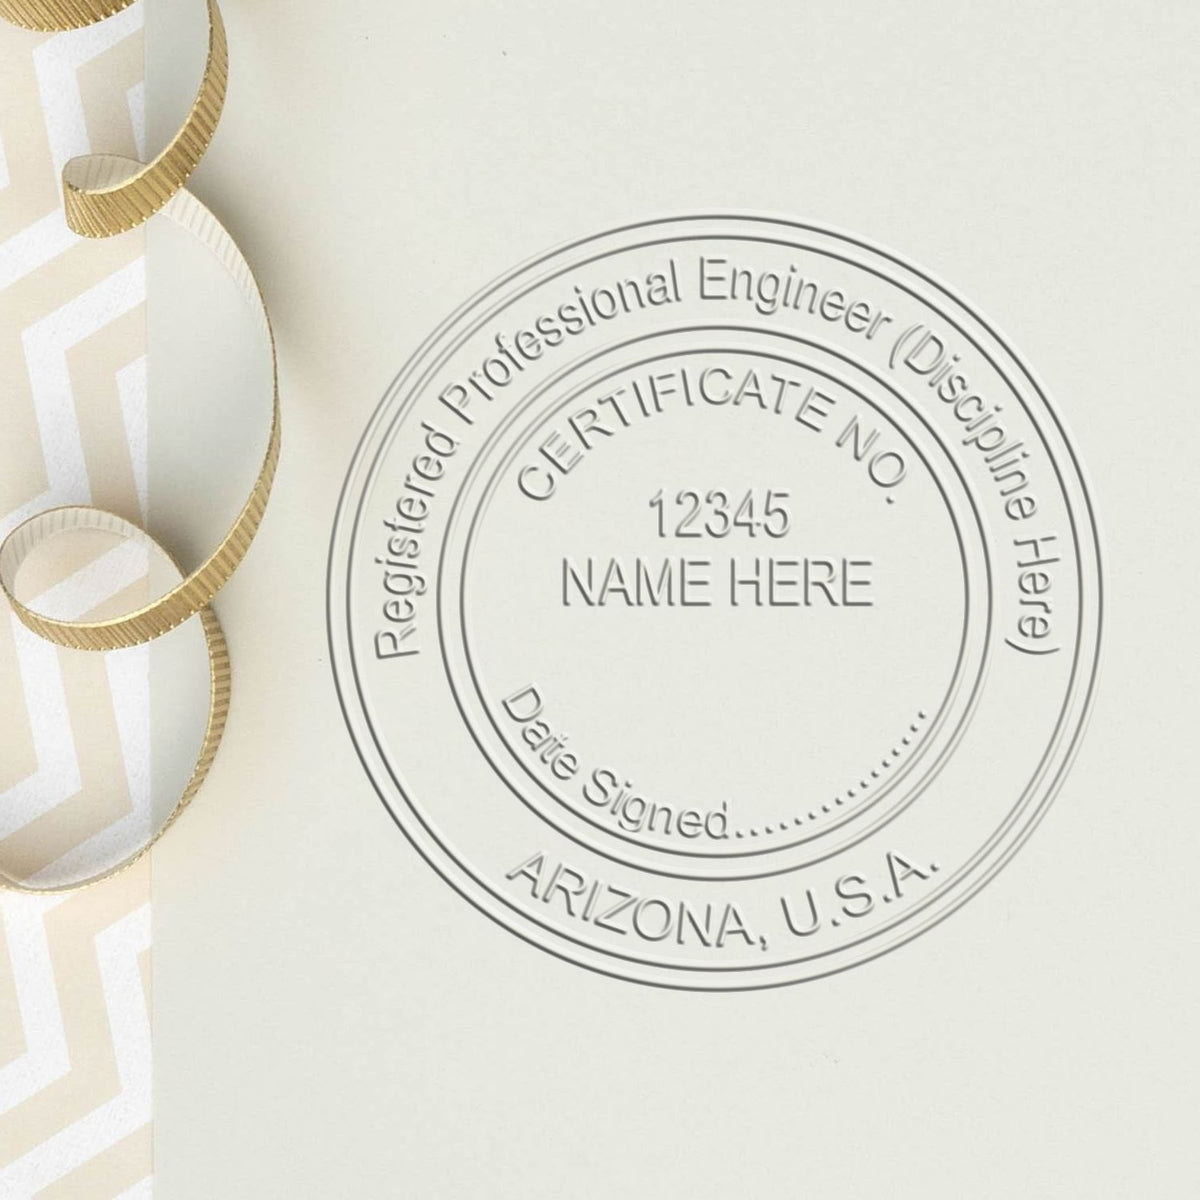 The Gift Arizona Engineer Seal stamp impression comes to life with a crisp, detailed image stamped on paper - showcasing true professional quality.